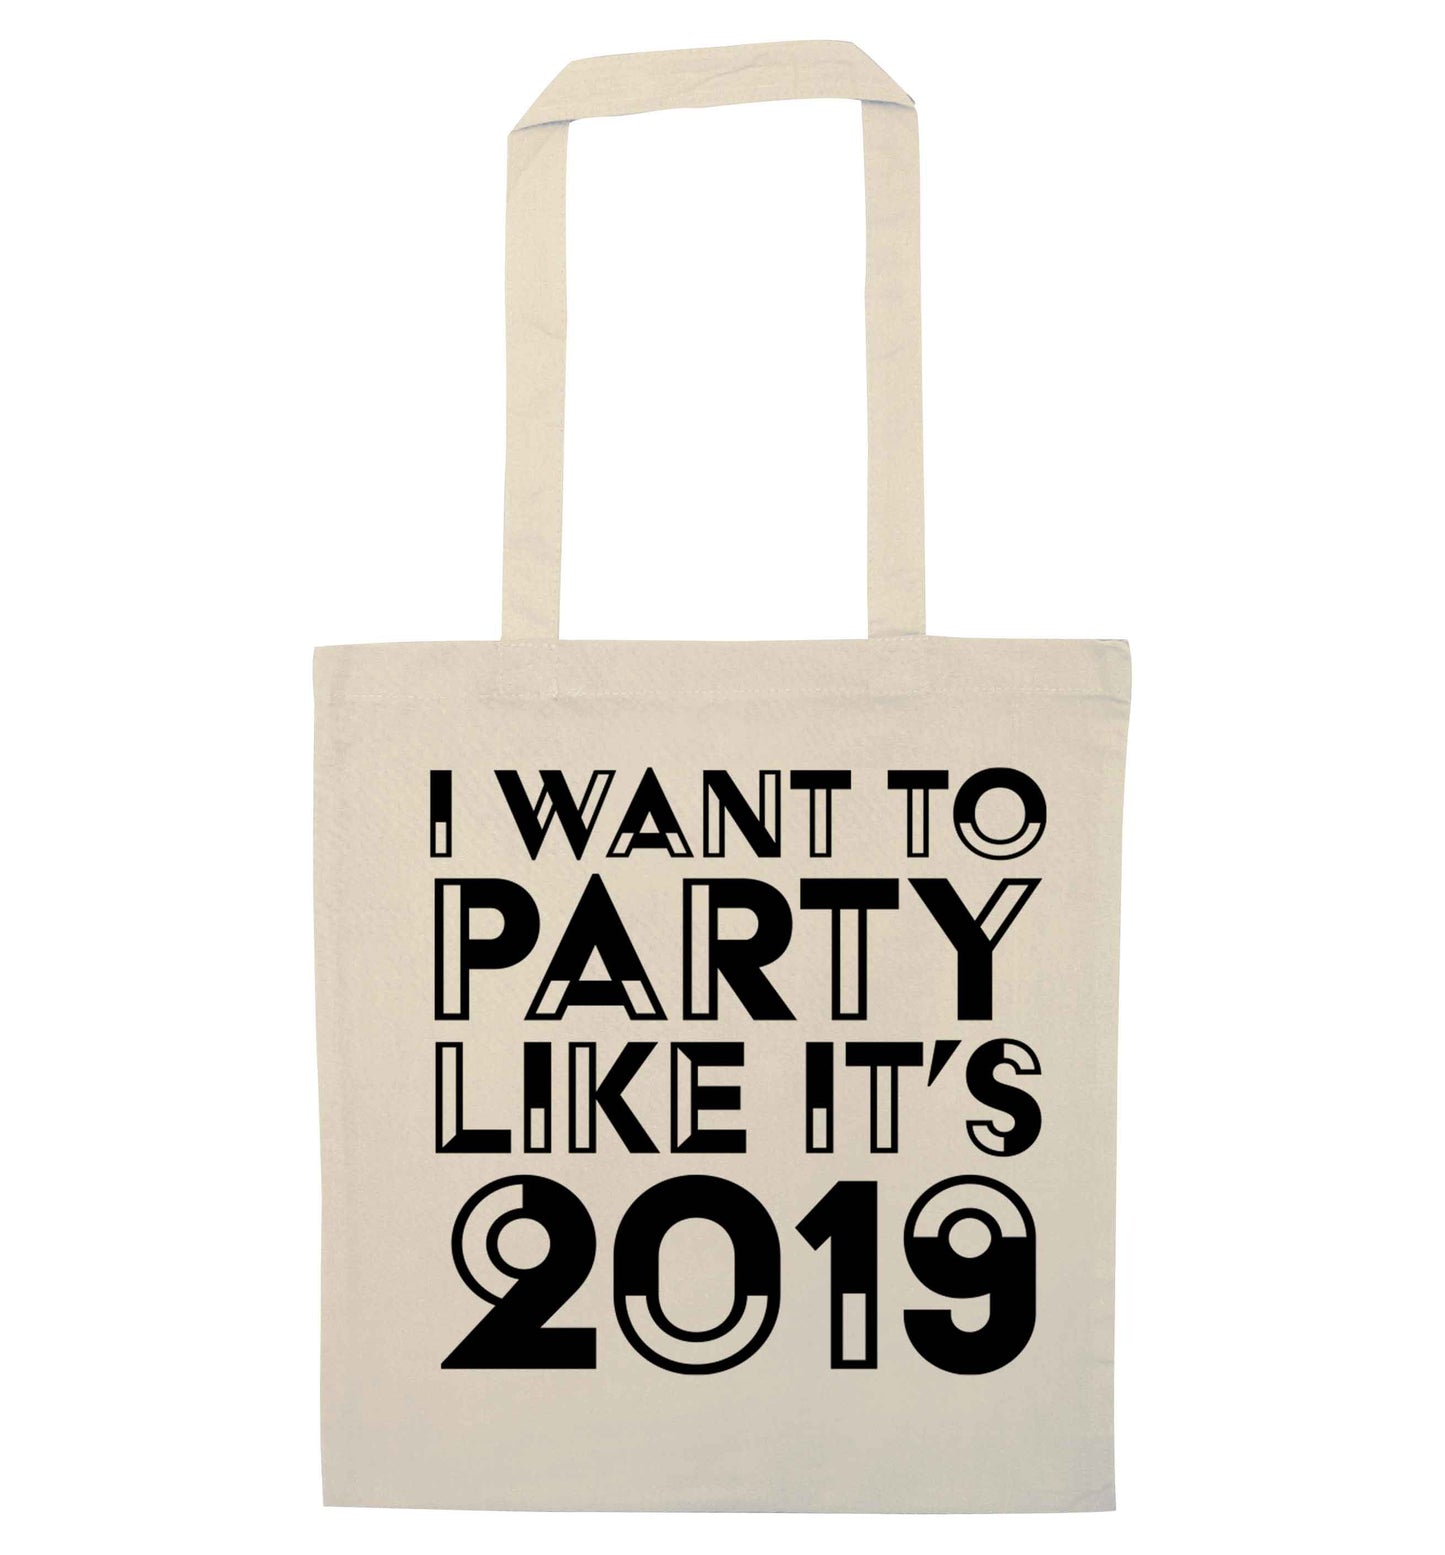 I want to party like it's 2019 natural tote bag